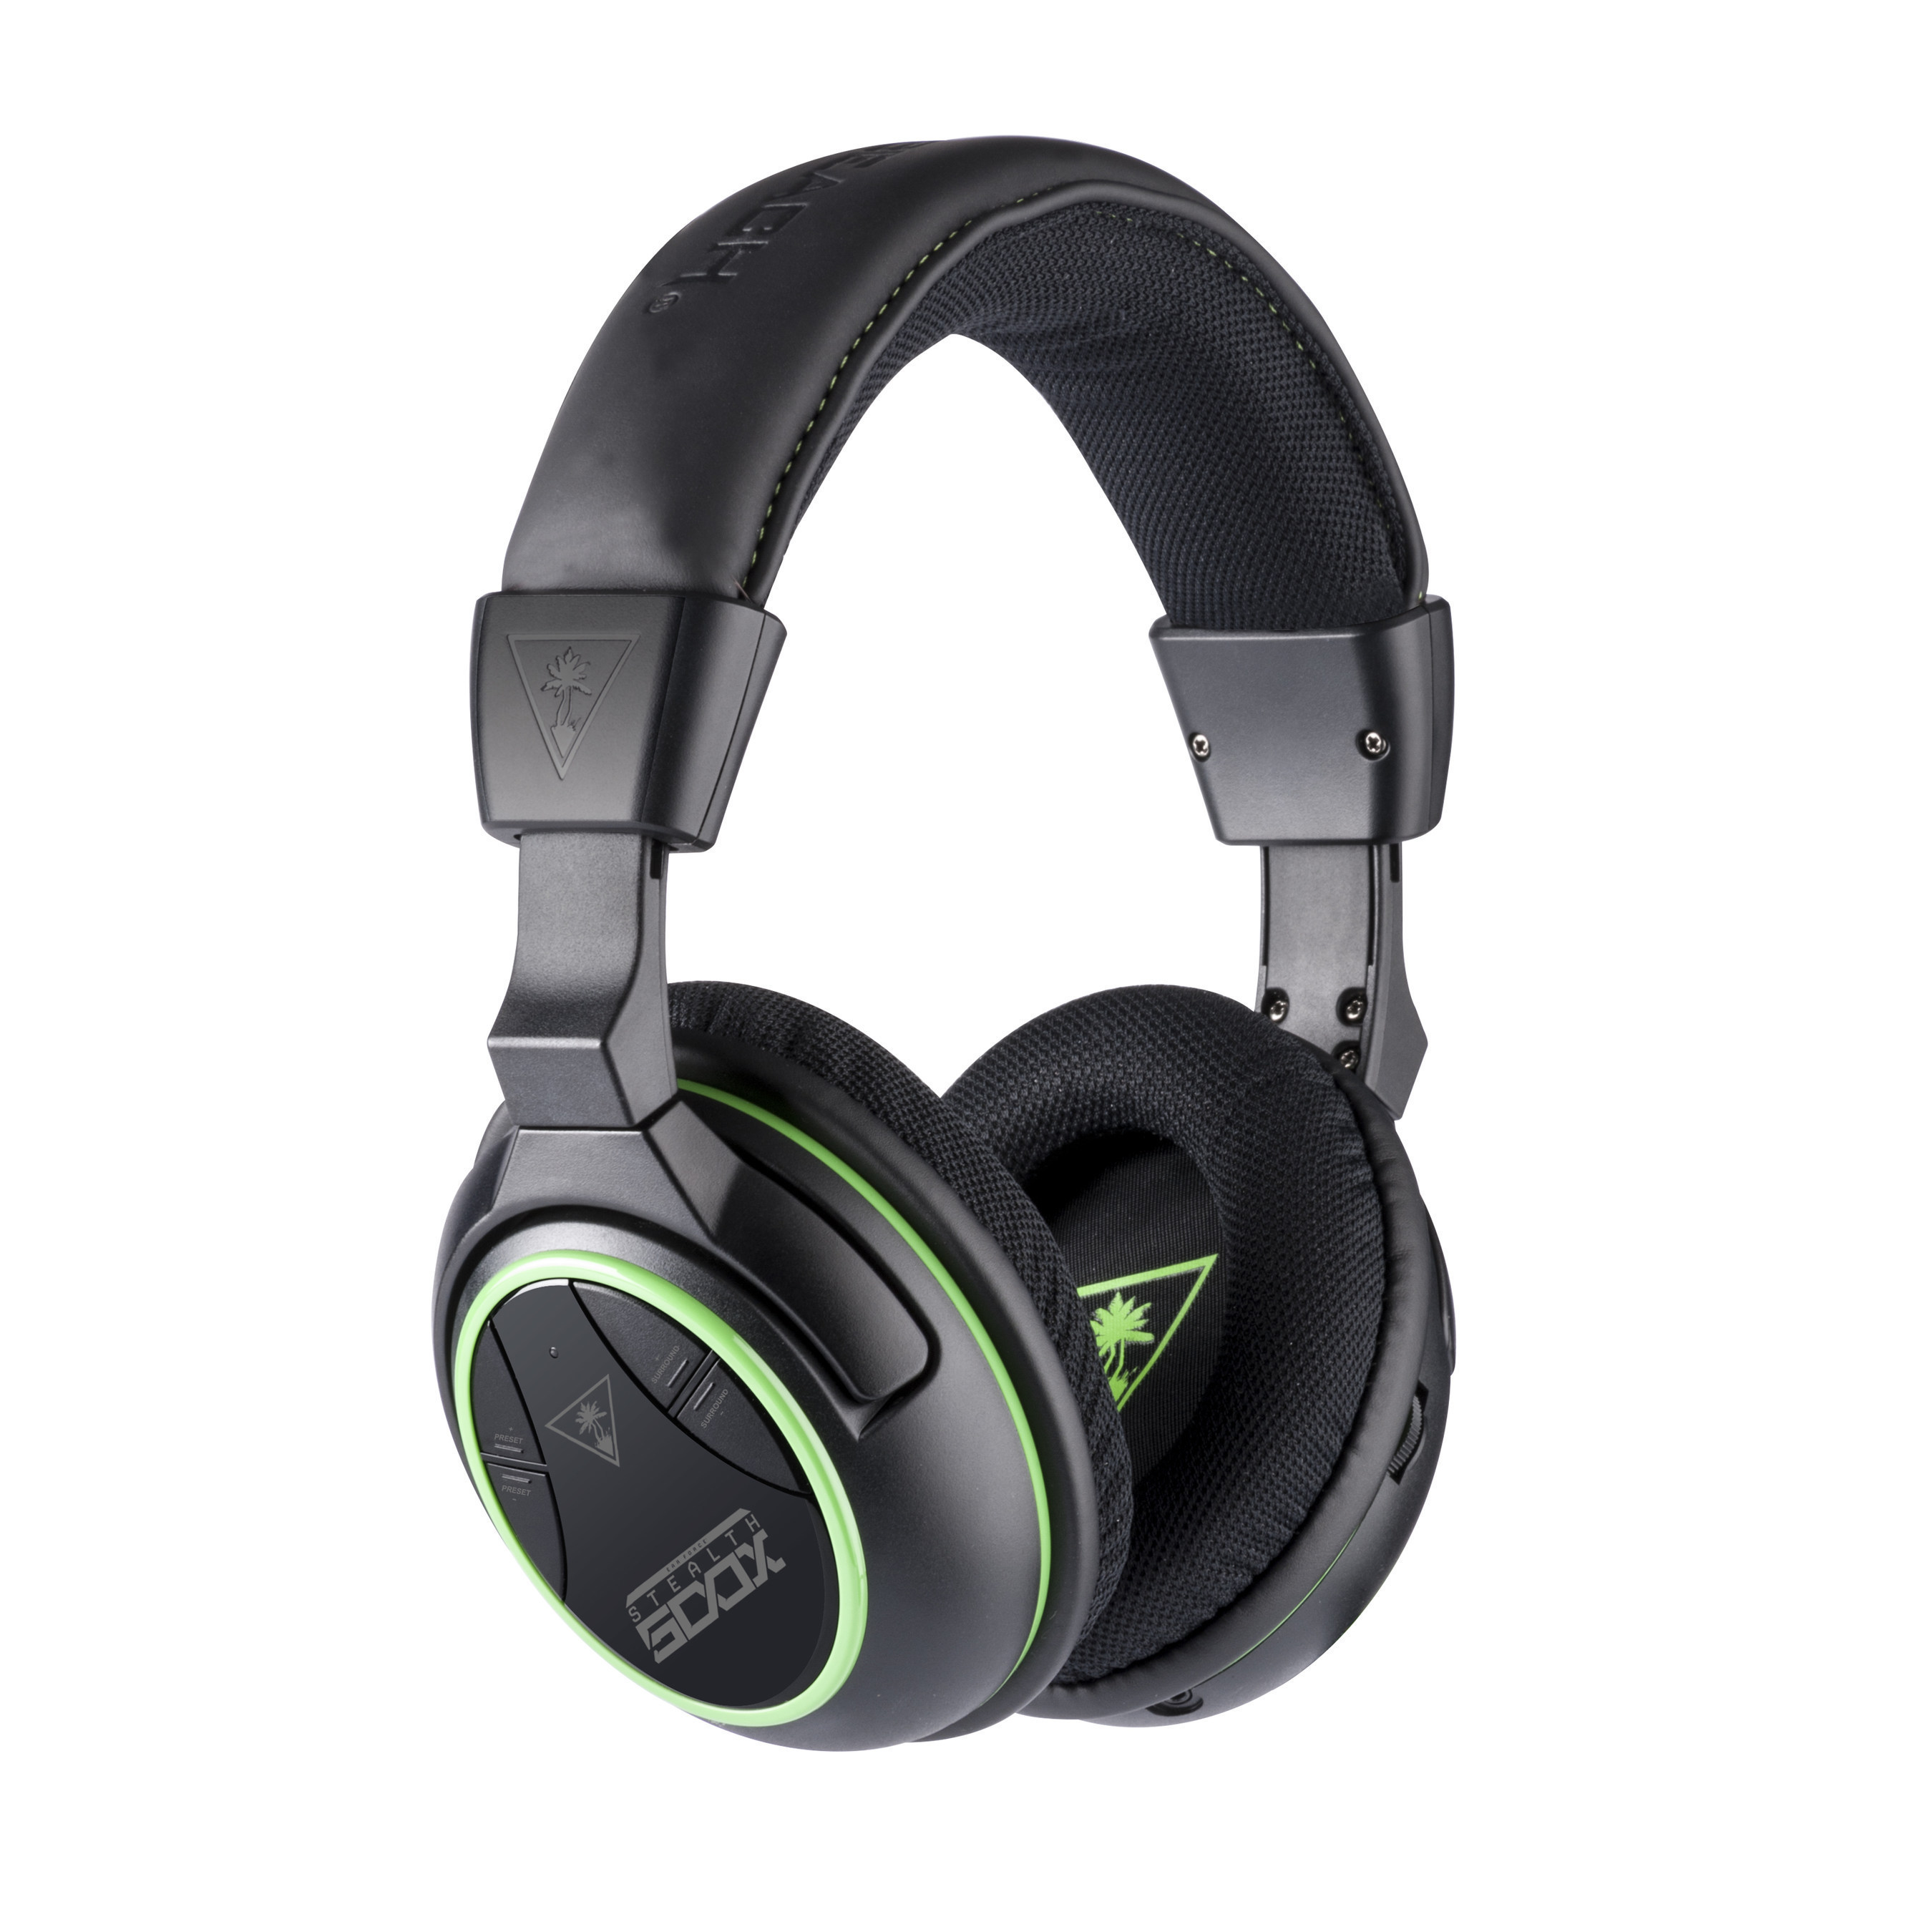 The Stealth 500X is the first and only fully wireless headset for the Xbox One and the first and only headset for the Xbox One that features DTS Headphone:X 7.1 channel surround sound.